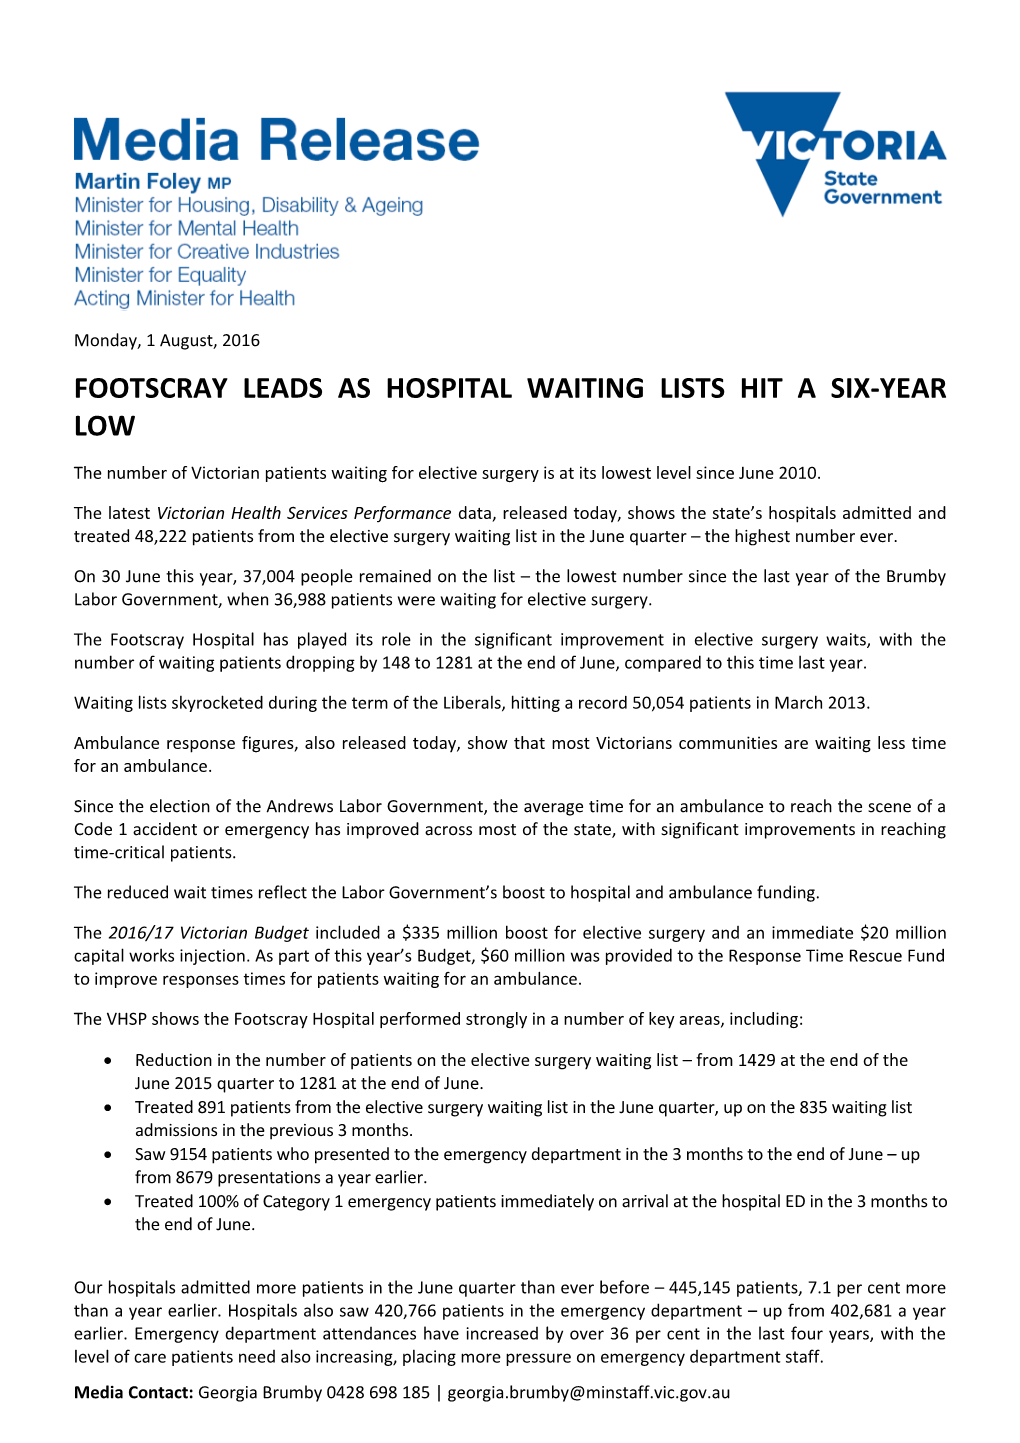 Footscray Leads As Hospital Waiting Lists Hit a Six-Year Low